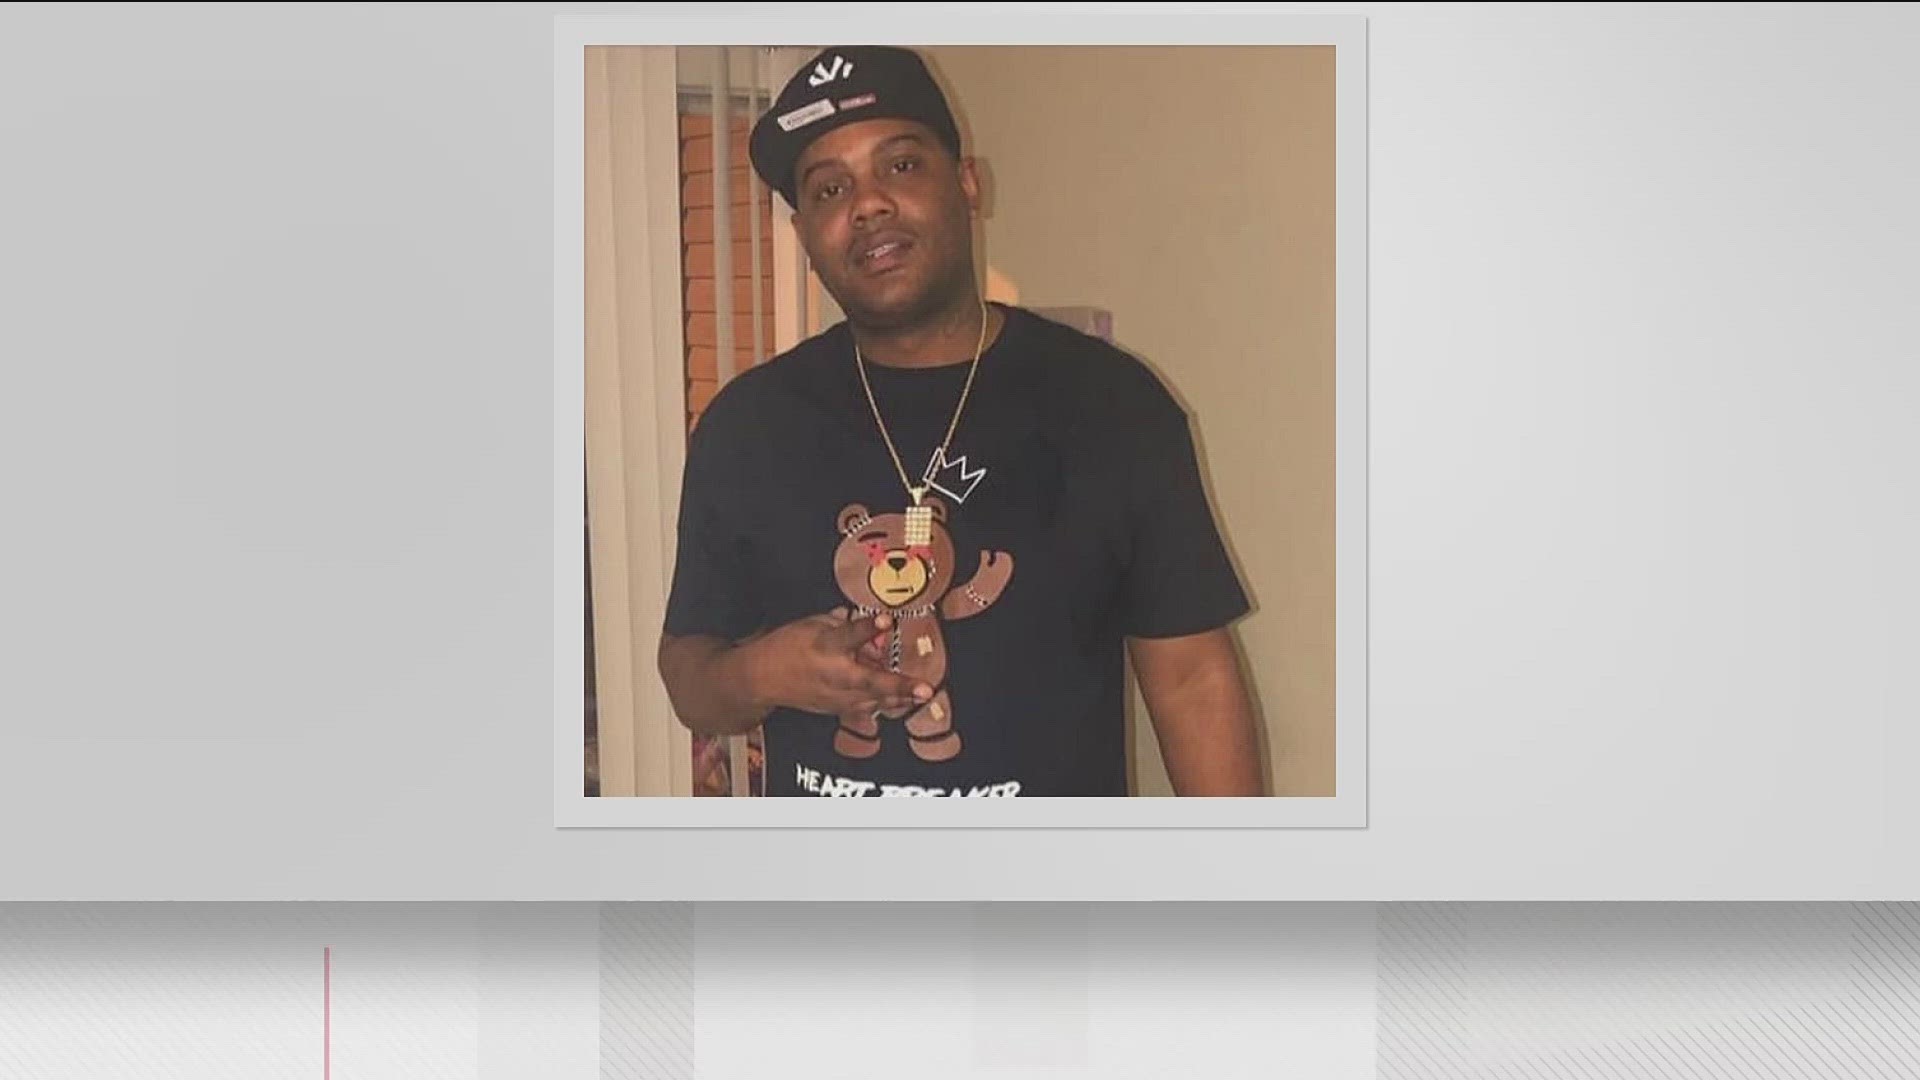 Marcus Bush, also known as "Slick Rich Juv," was identified as the man who was found dead at a Gwinnett County gas station.